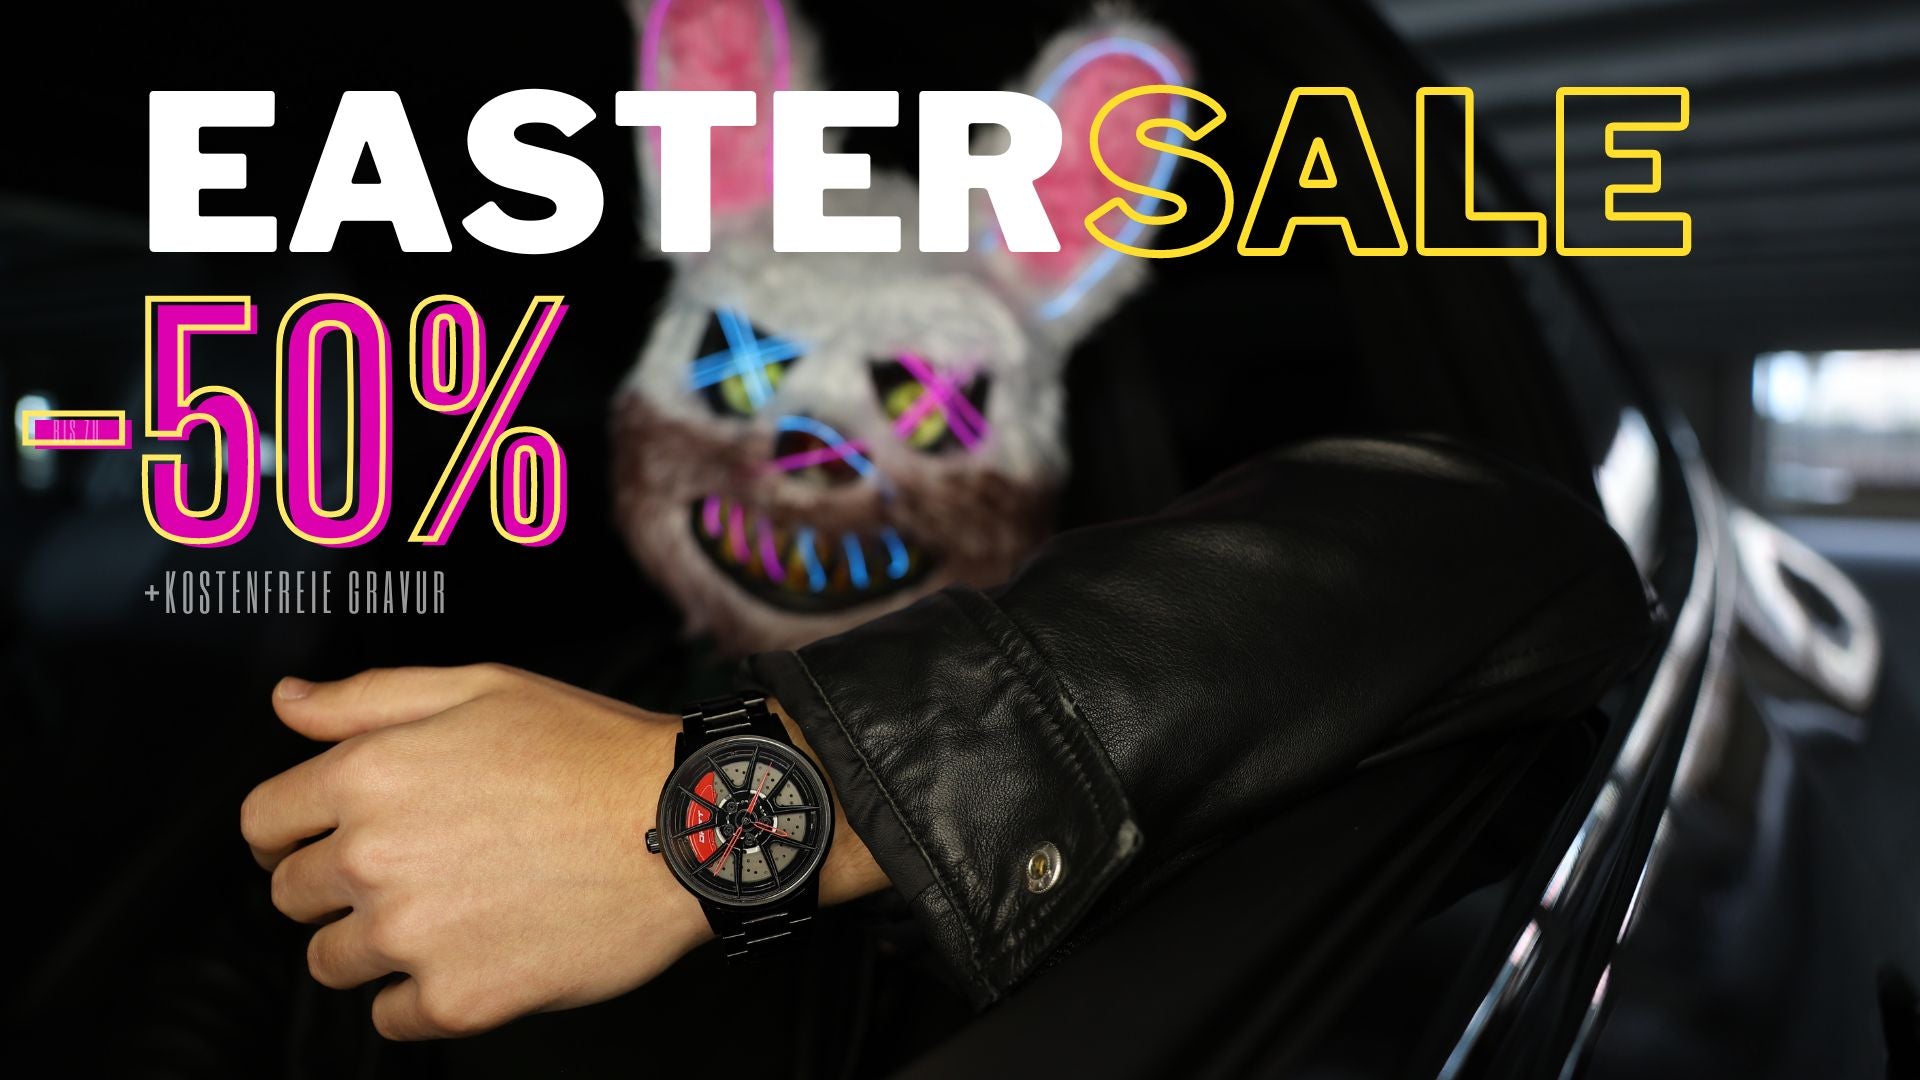 An advertisement for DriftElement's Easter Sale showing a 50% discount and offering free engraving. A person's wrist is adorned with a black watch featuring a bold, red and grey rim-inspired design, indicative of the innovative and youthful spirit of the German startup.